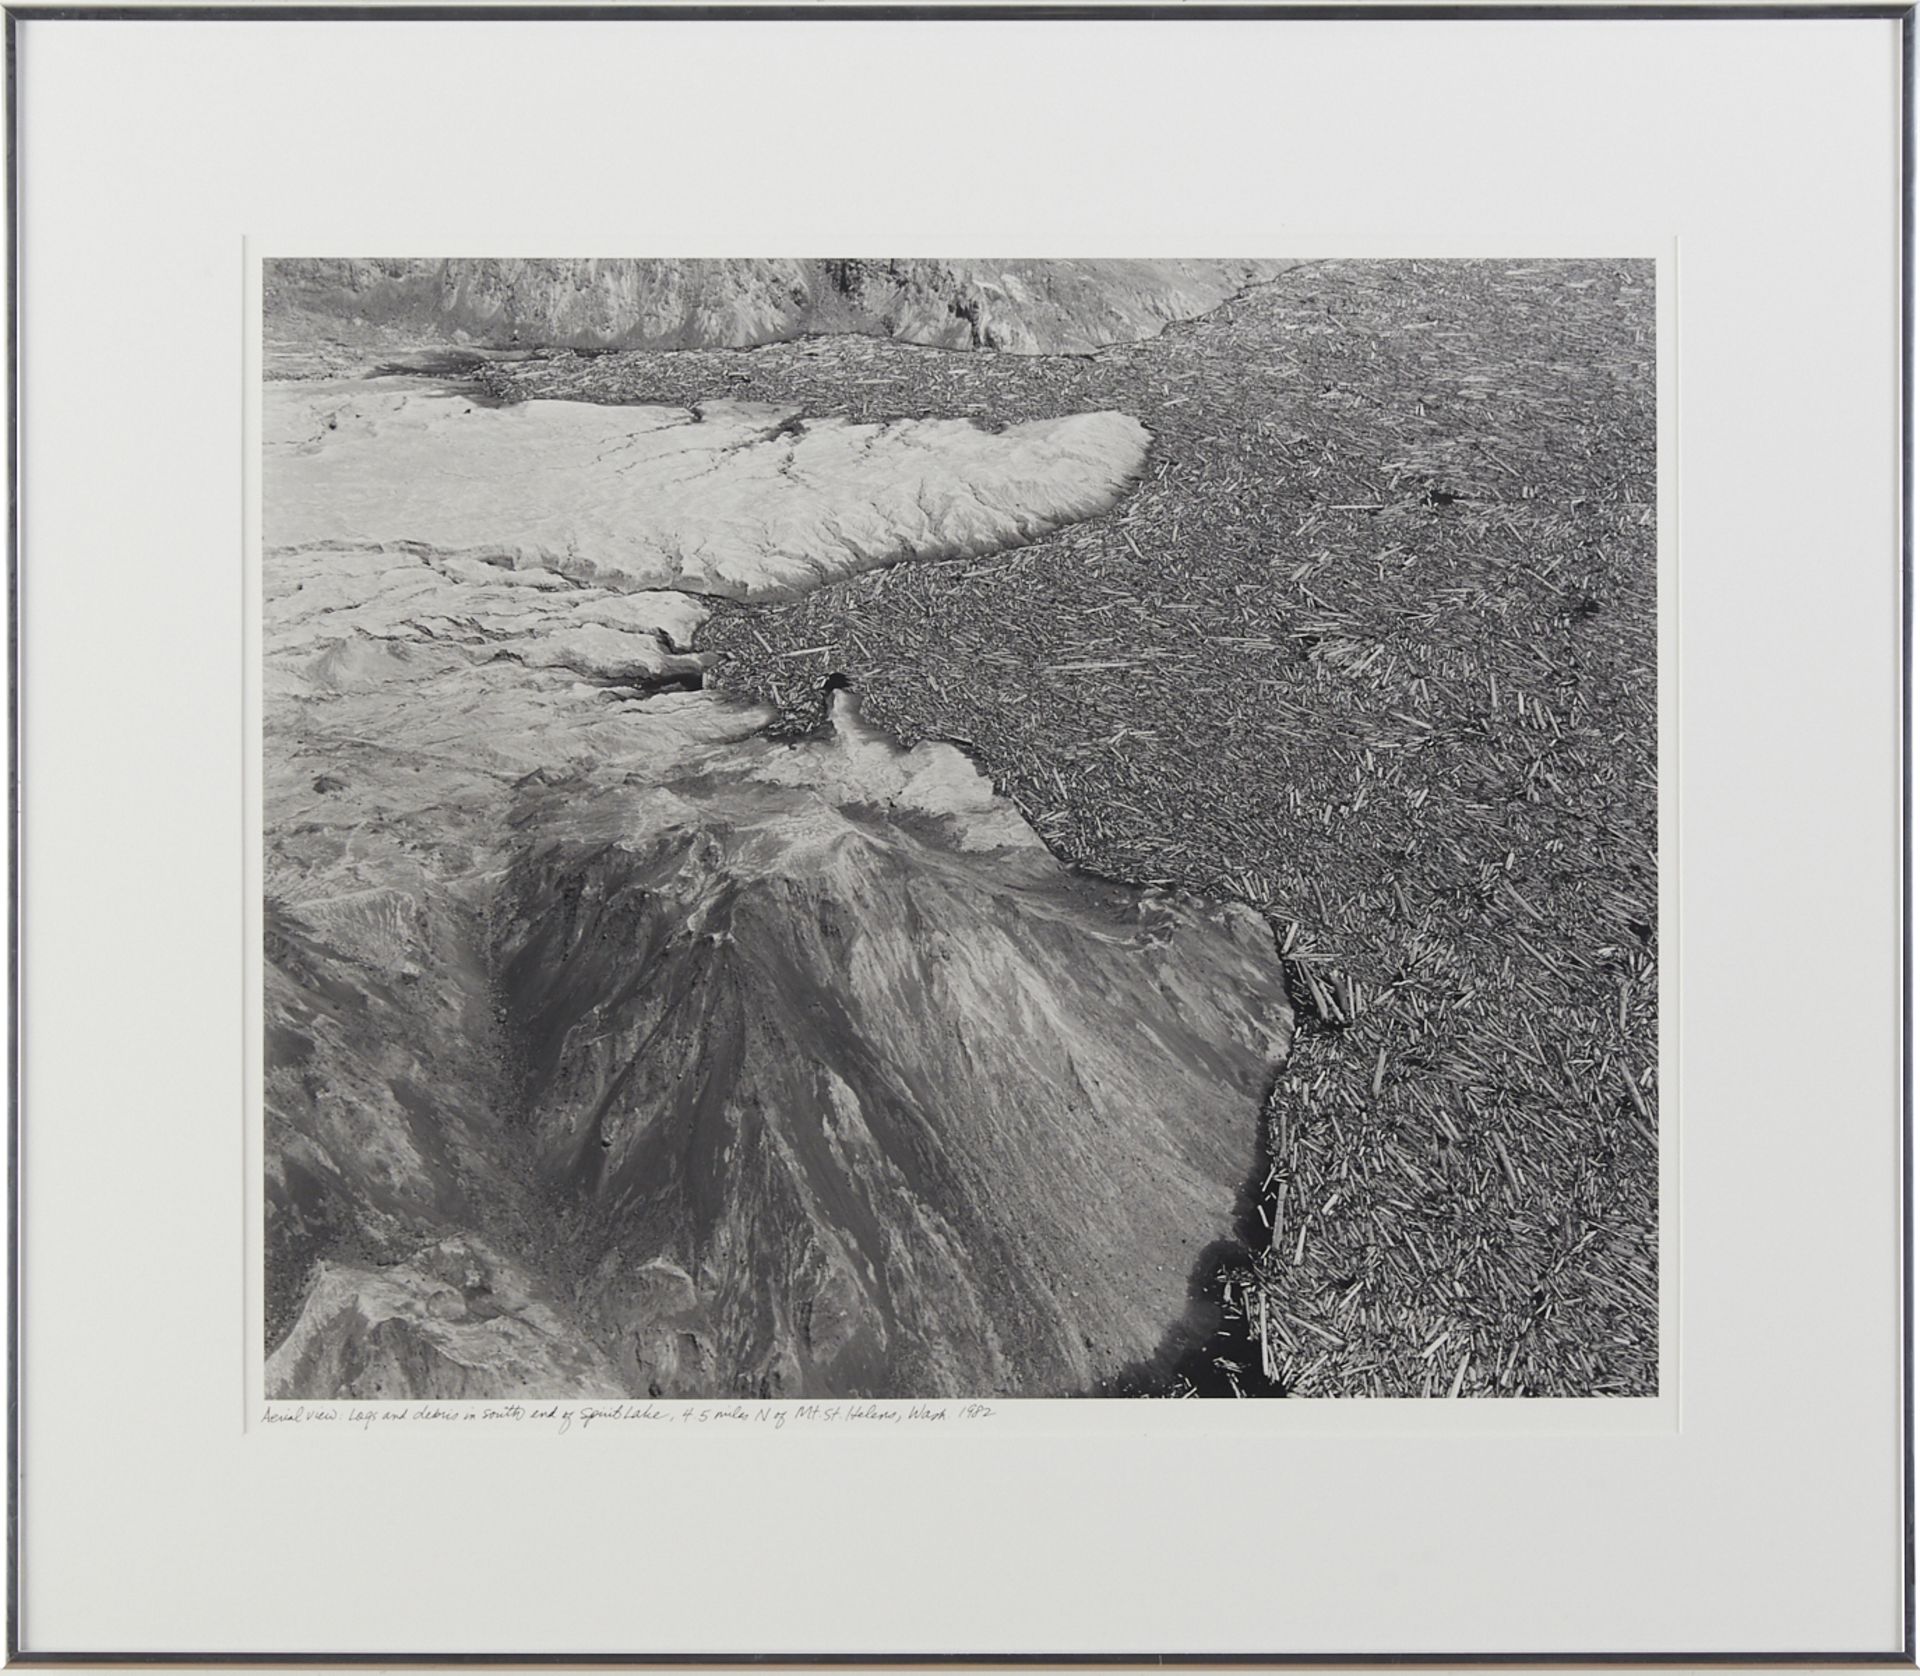 Frank Gohlke "Aerial View: Logs and Debris" Photograph - Image 2 of 3